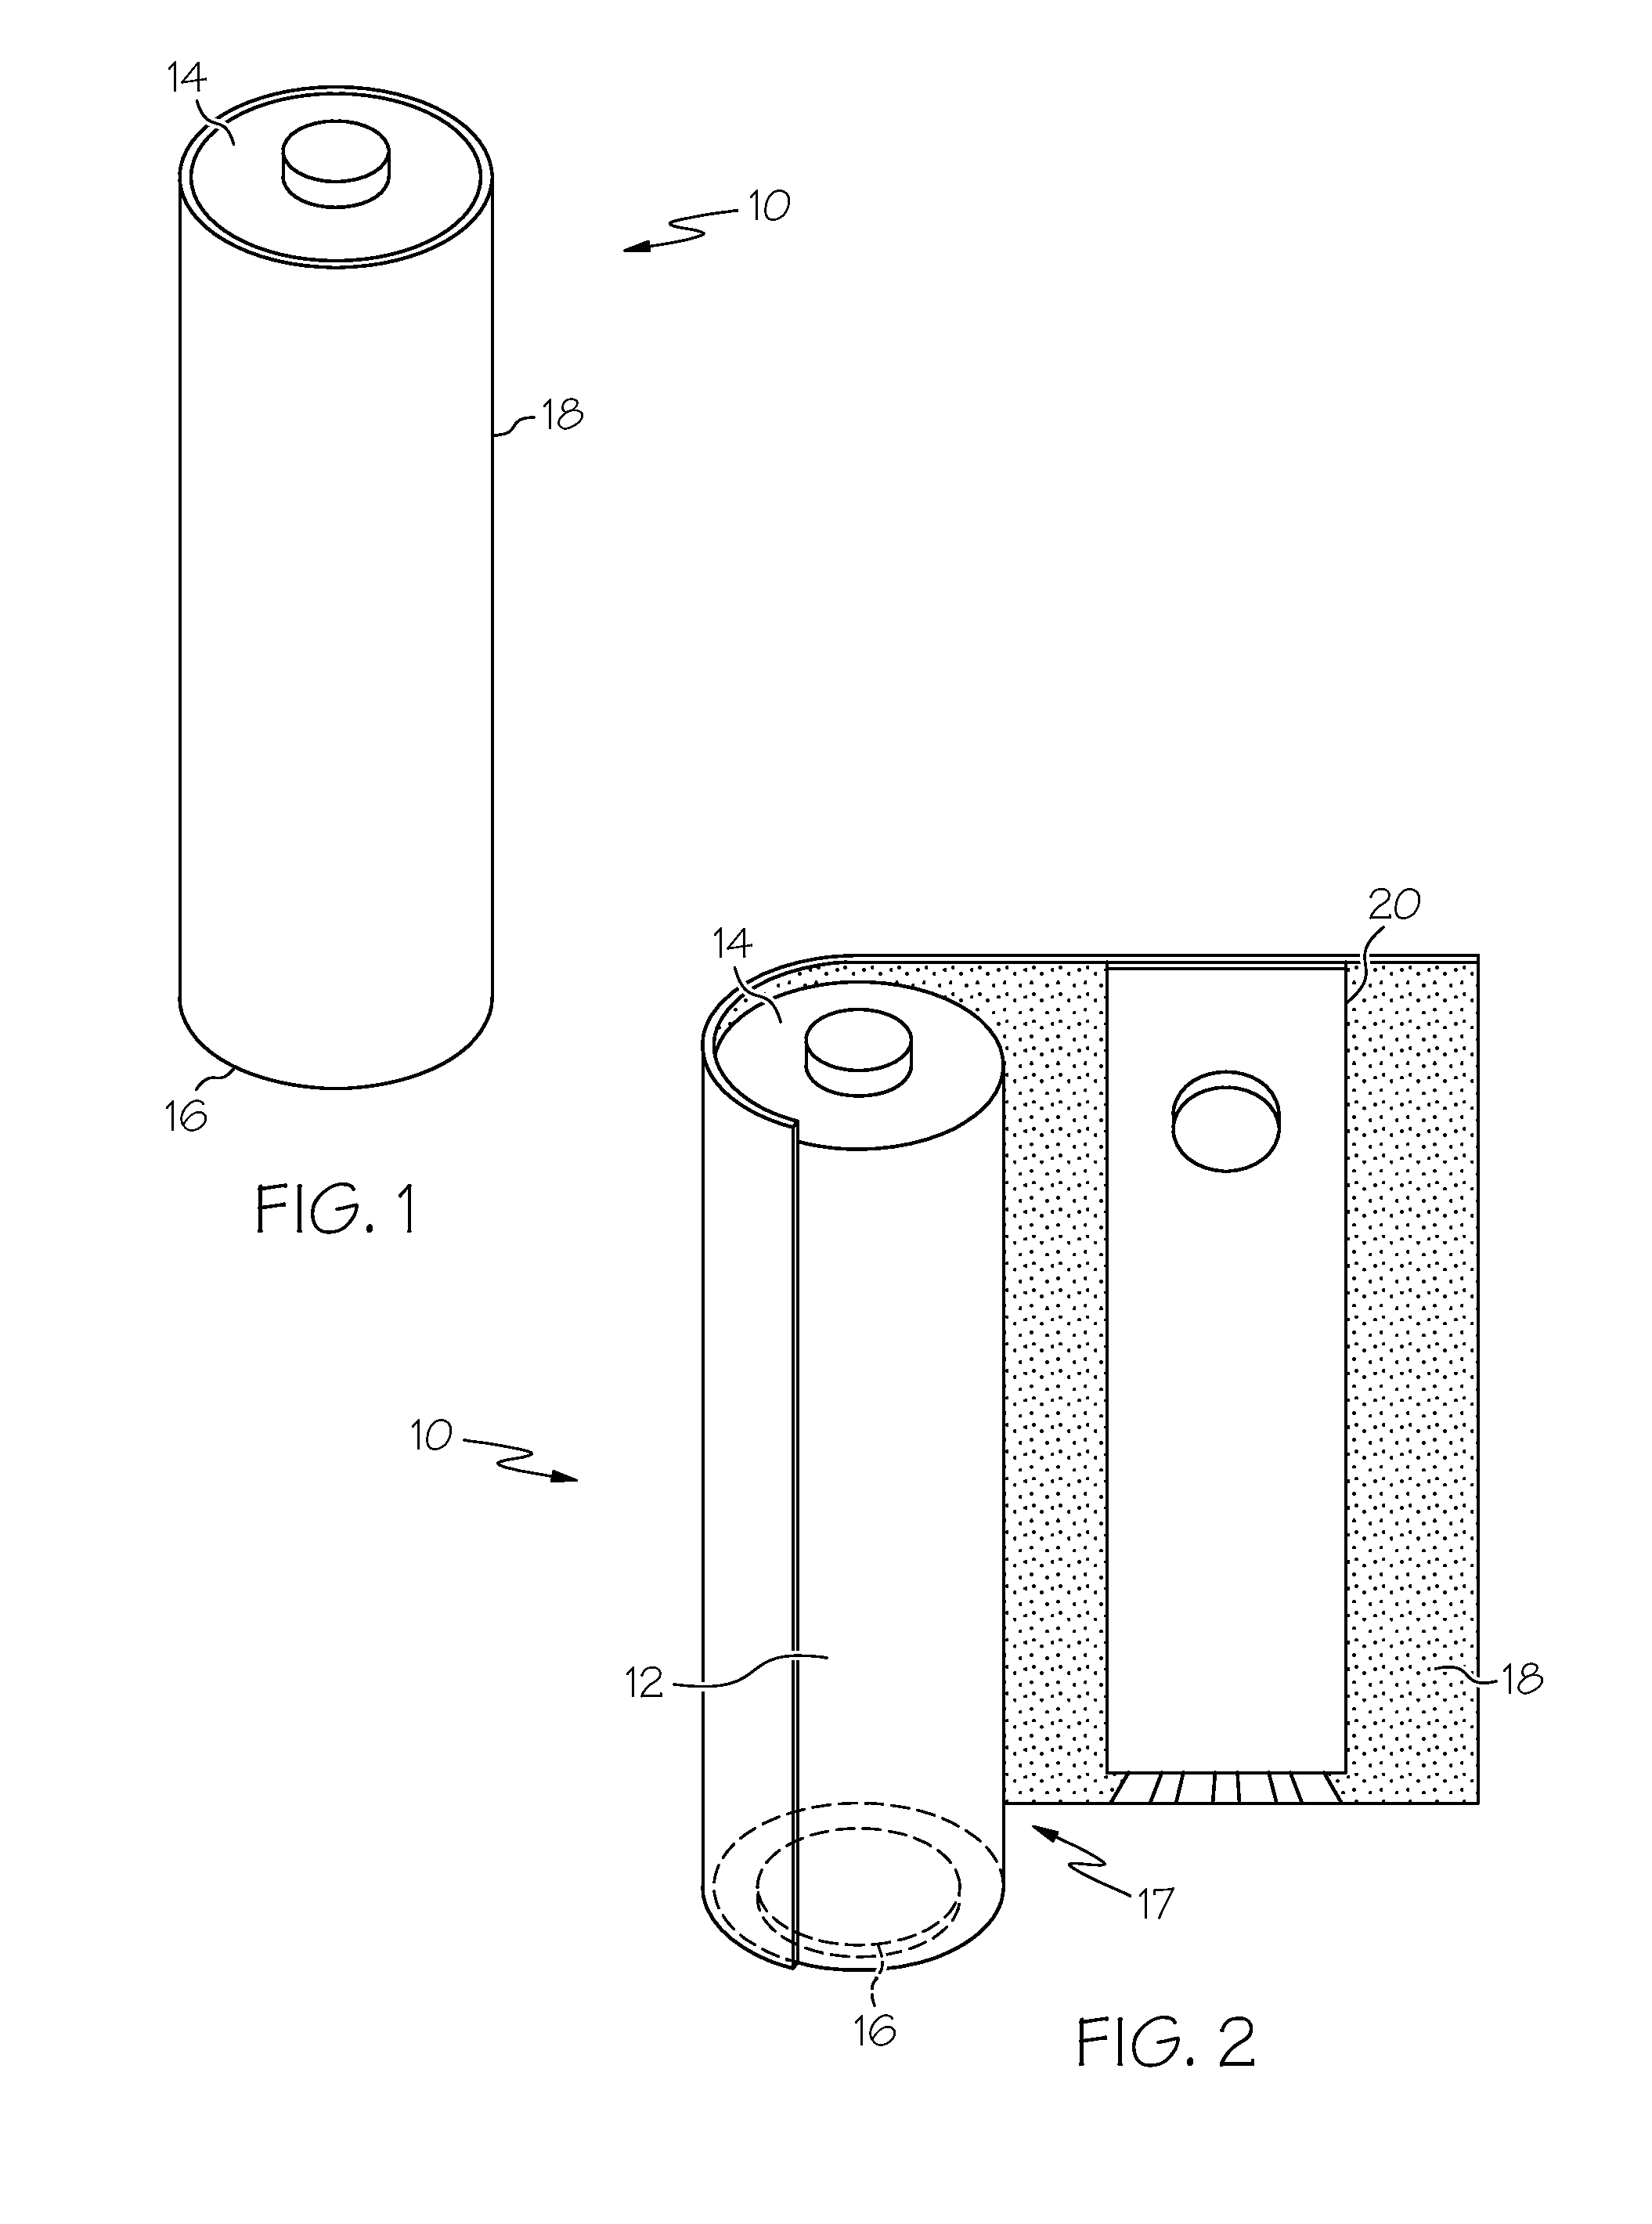 Apparatuses and Methods for Determining Potential Energy Stored in an Electrochemical Cell